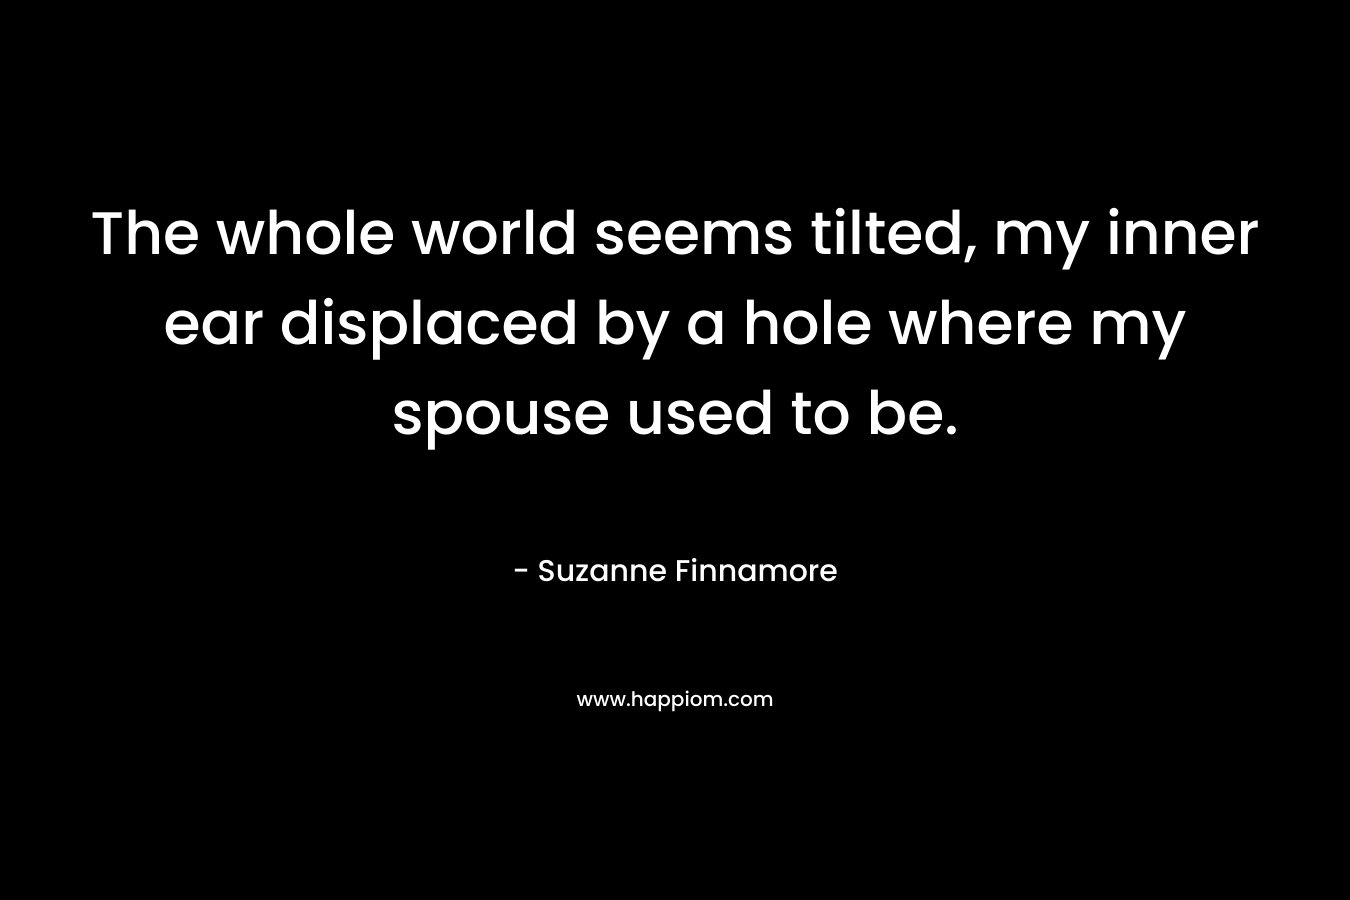 The whole world seems tilted, my inner ear displaced by a hole where my spouse used to be.